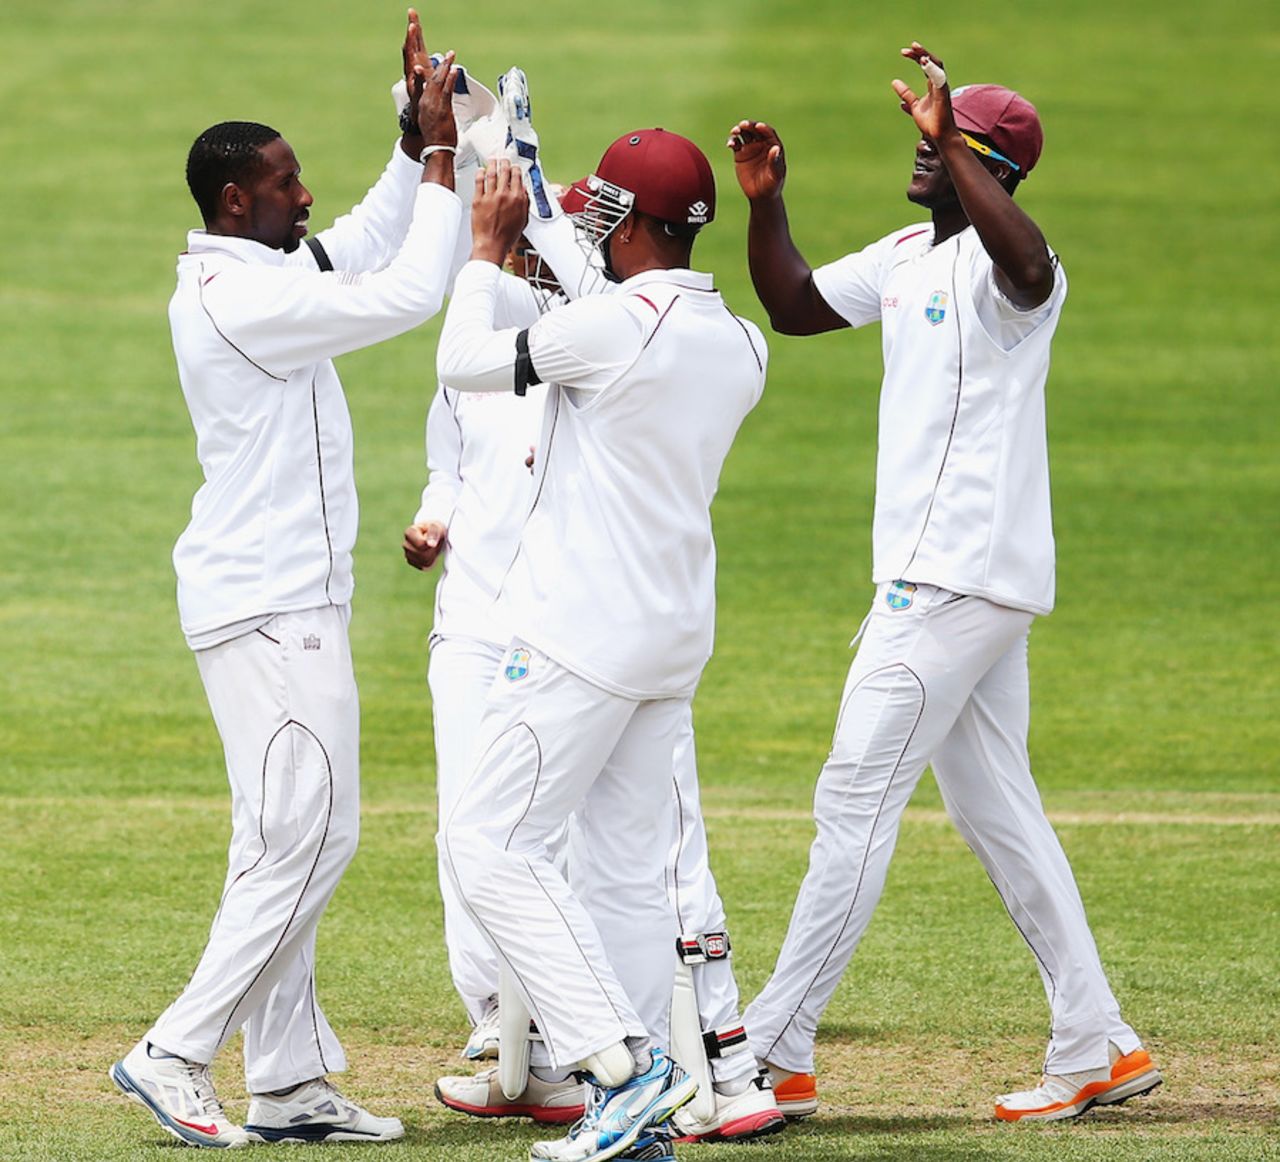 Shane Shillingford is mobbed after he picked his third wicket, New Zealand v West Indies, 1st Test, Dunedin, 5th day, December 7, 2013